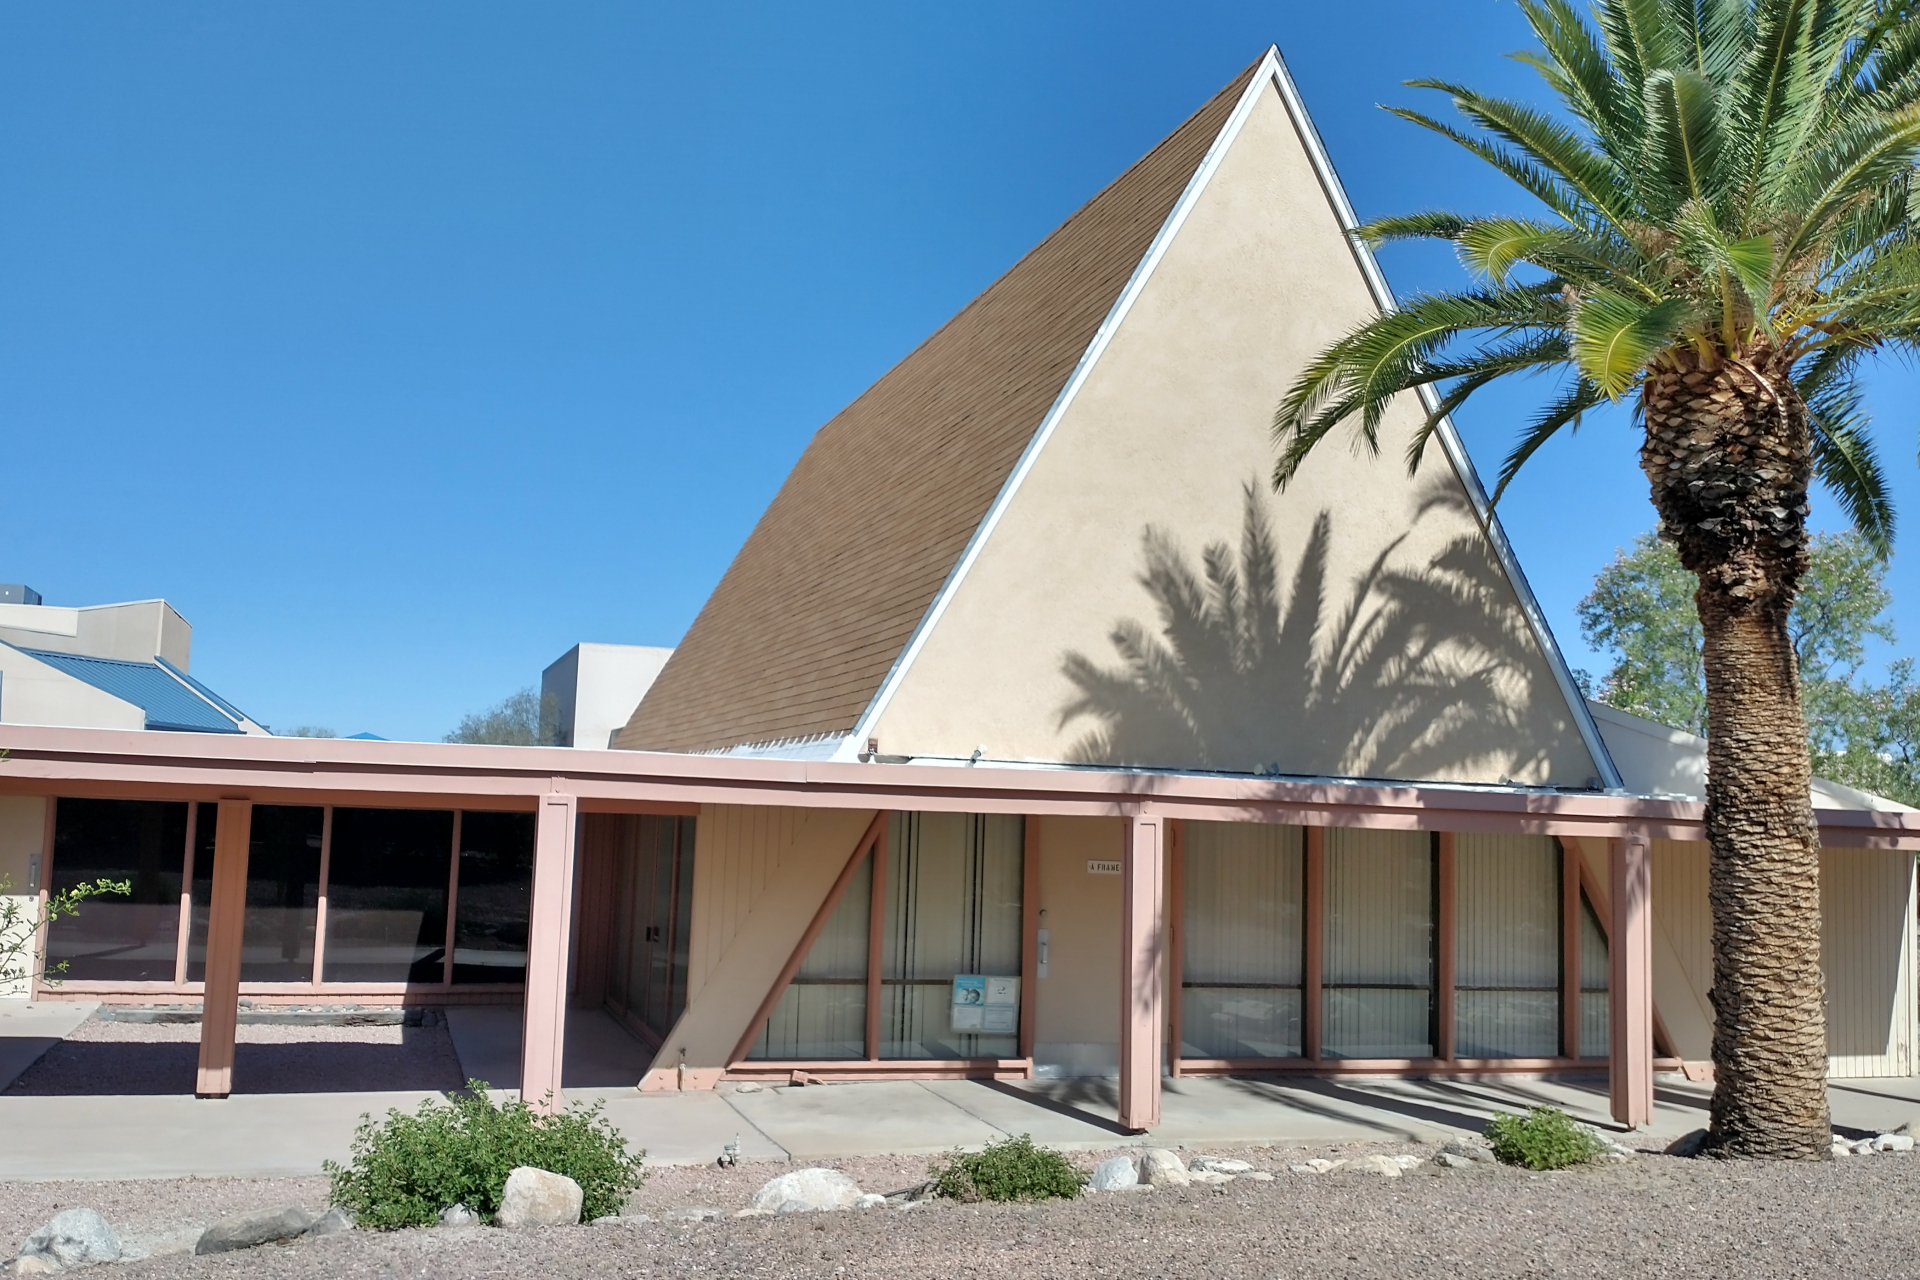 A-Frame Building at St. Paul's UMC in Tucson, Arizona